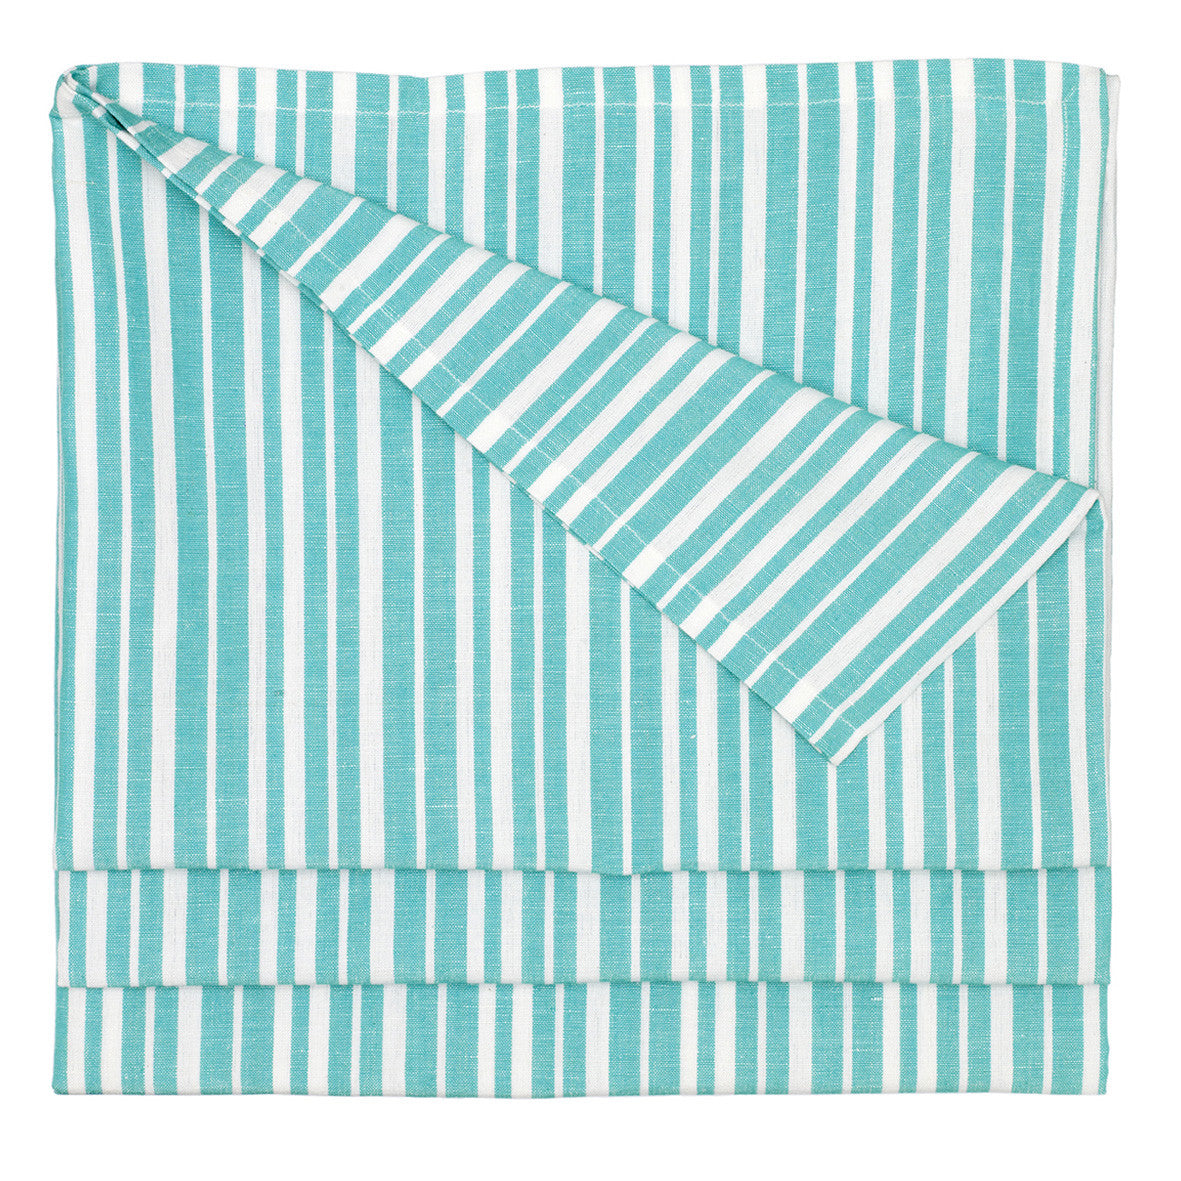 Palermo Ticking Stripe Cotton Linen Tablecloth in Pacific Turquoise Blue Ships from Canada (USA)